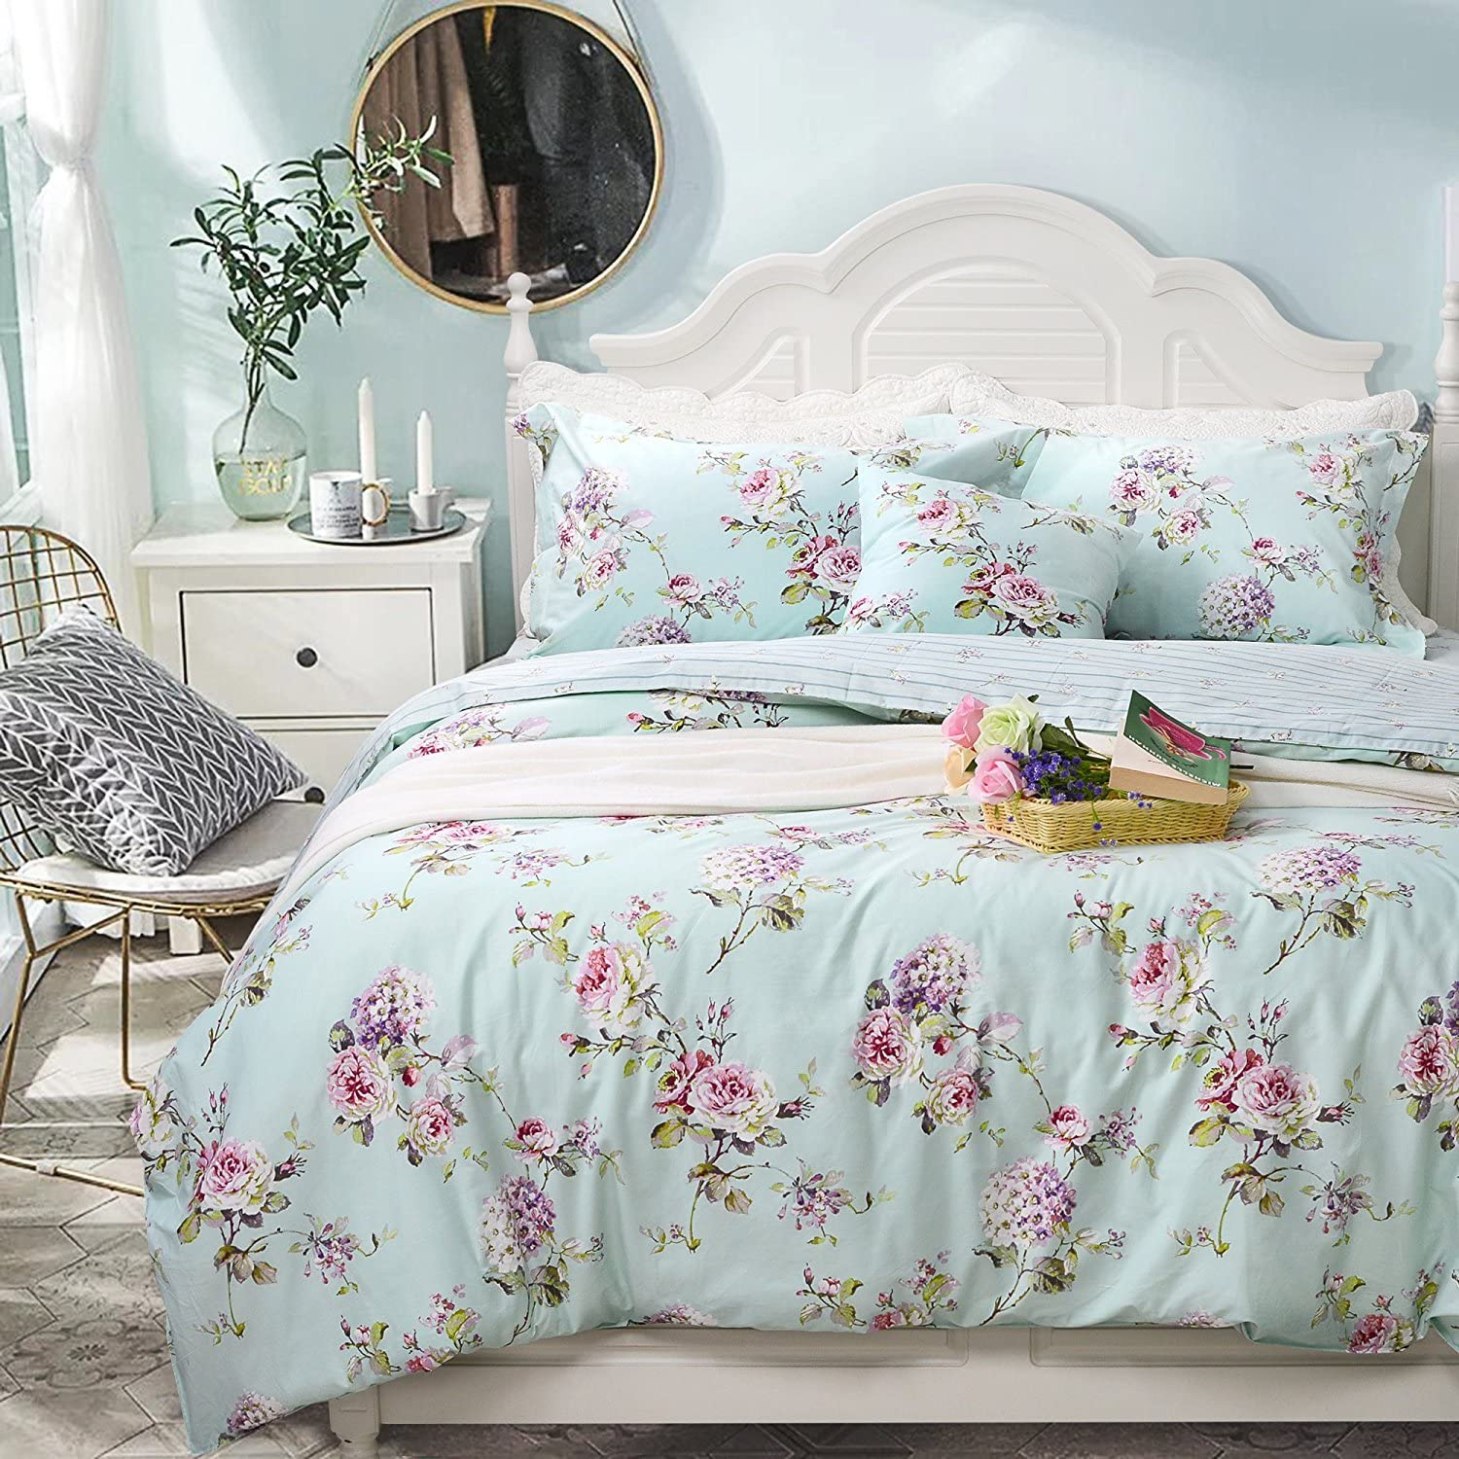 FADFAY Floral Duvet Cover Set, best duvet covers with zippers